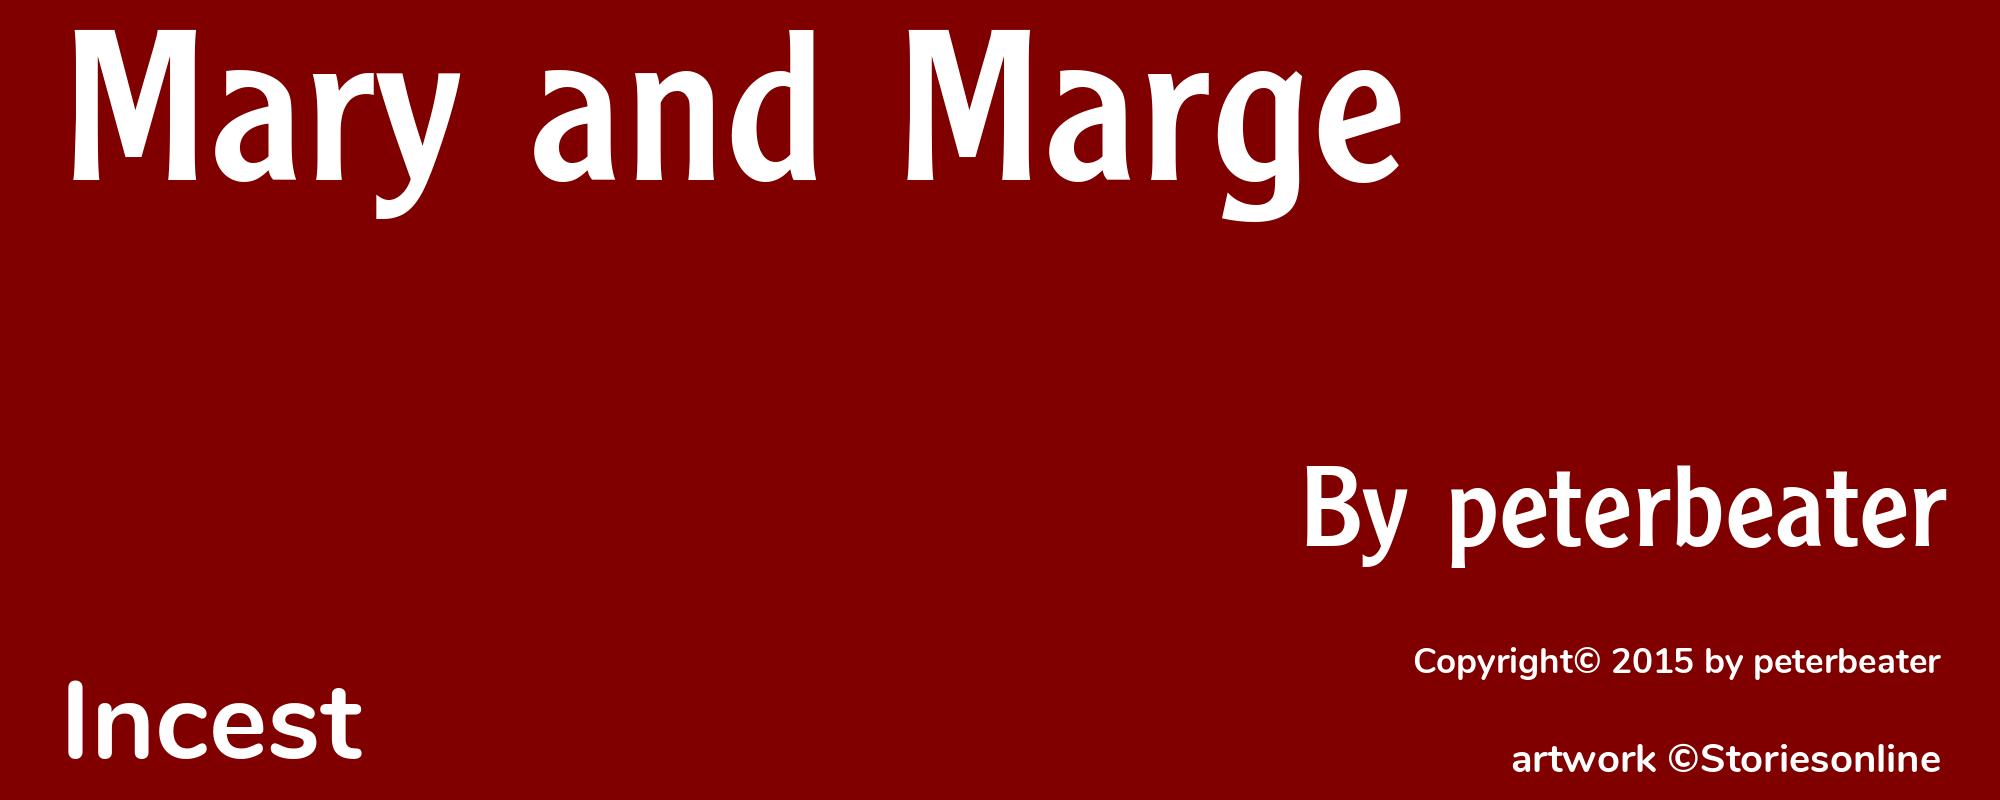 Mary and Marge - Cover